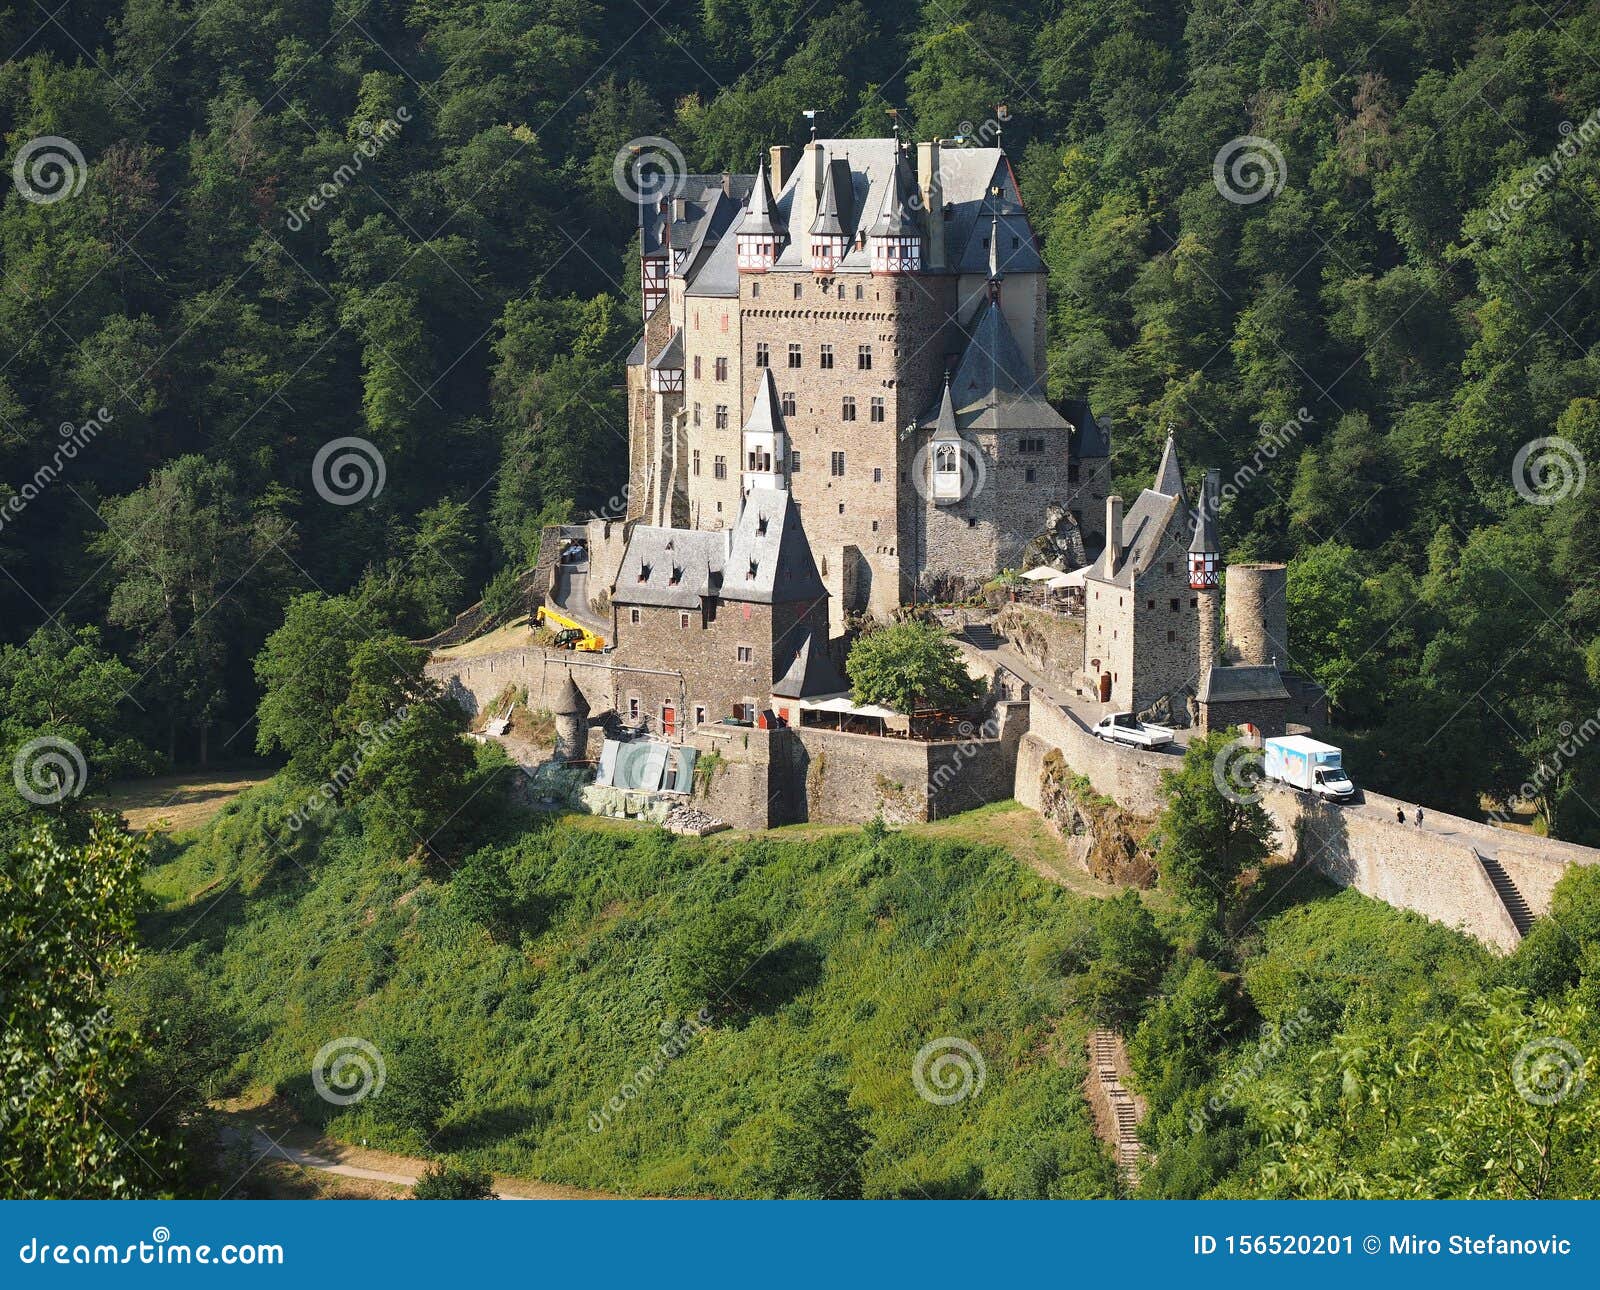 Eltz Castle Is A Medieval Castle Nestled In The Hills Above The Moselle River Between Koblenz And Trier Stock Image Image Of Class Interesting 156520201